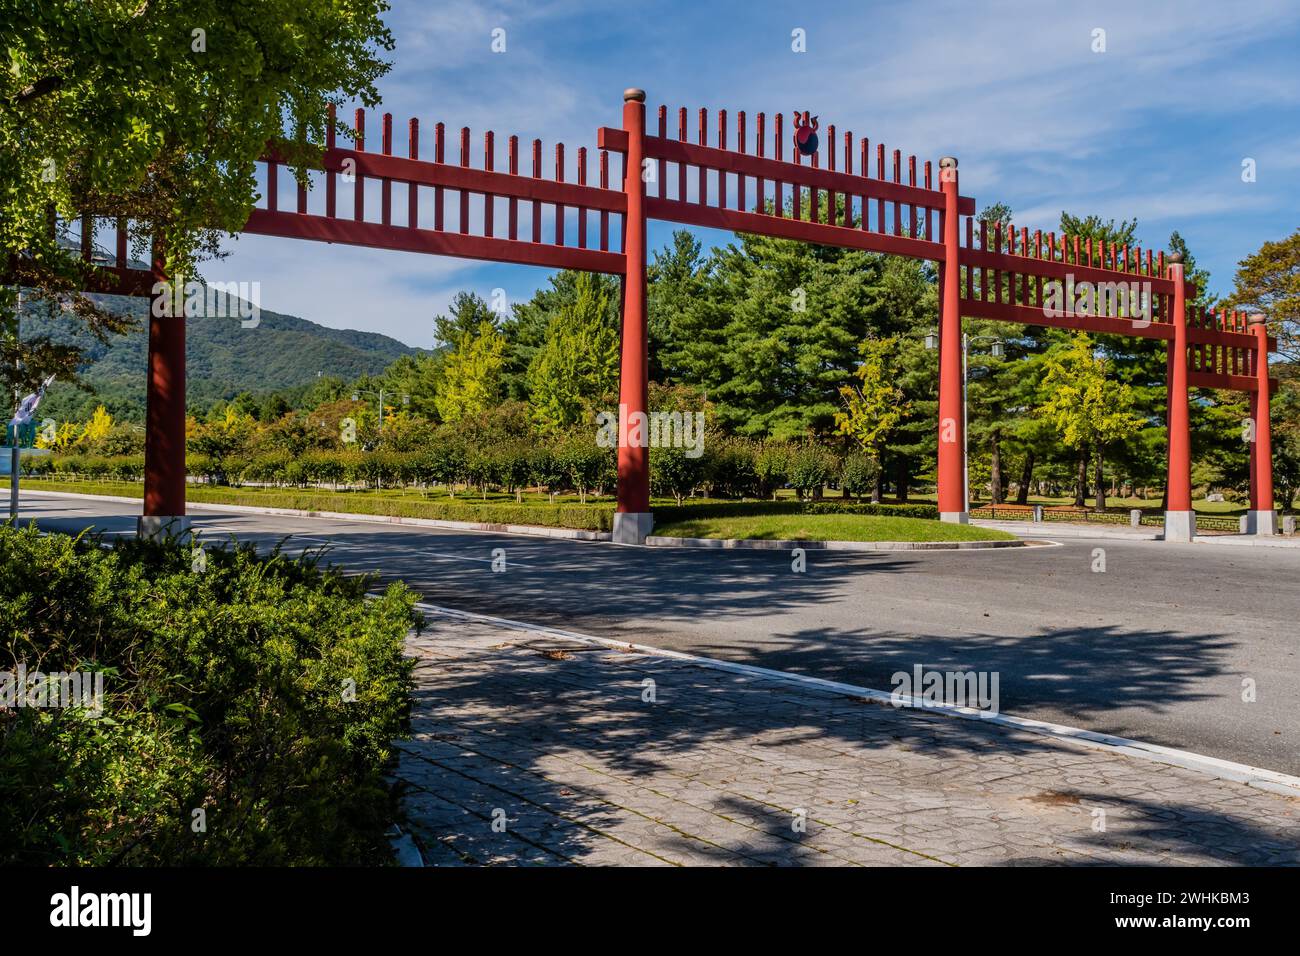 Large red wooden gate across four lane road in public park in South Korea Stock Photo